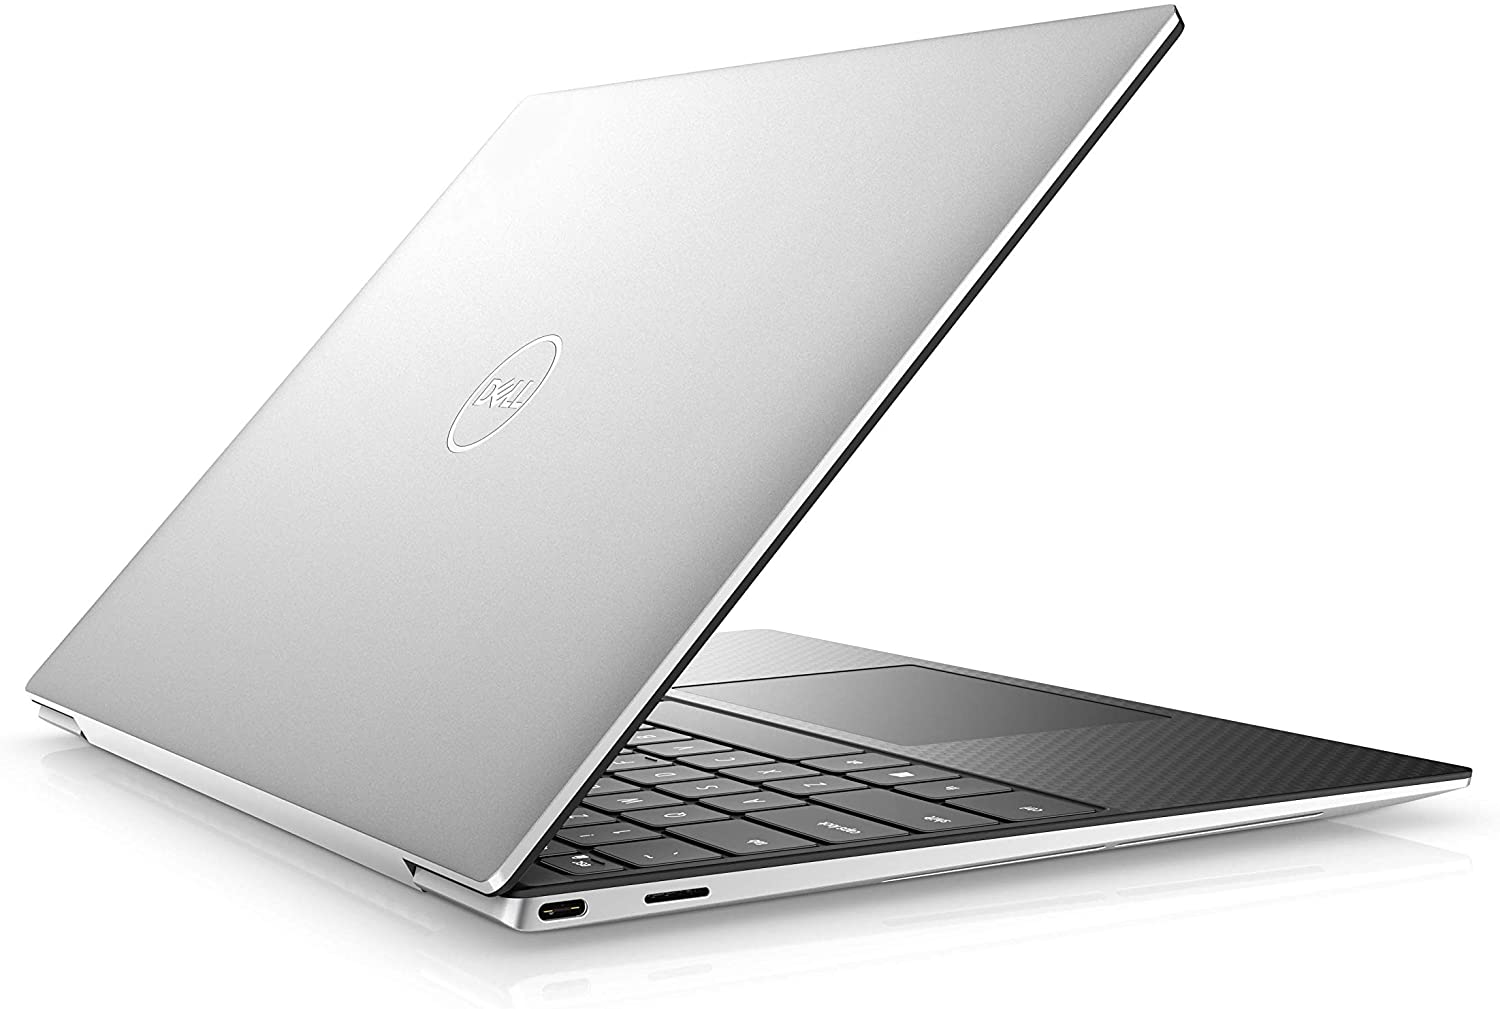 Dell New XPS 13 9300 13inch FHD Laptop, Intel Core i71065G7 (10th Gen